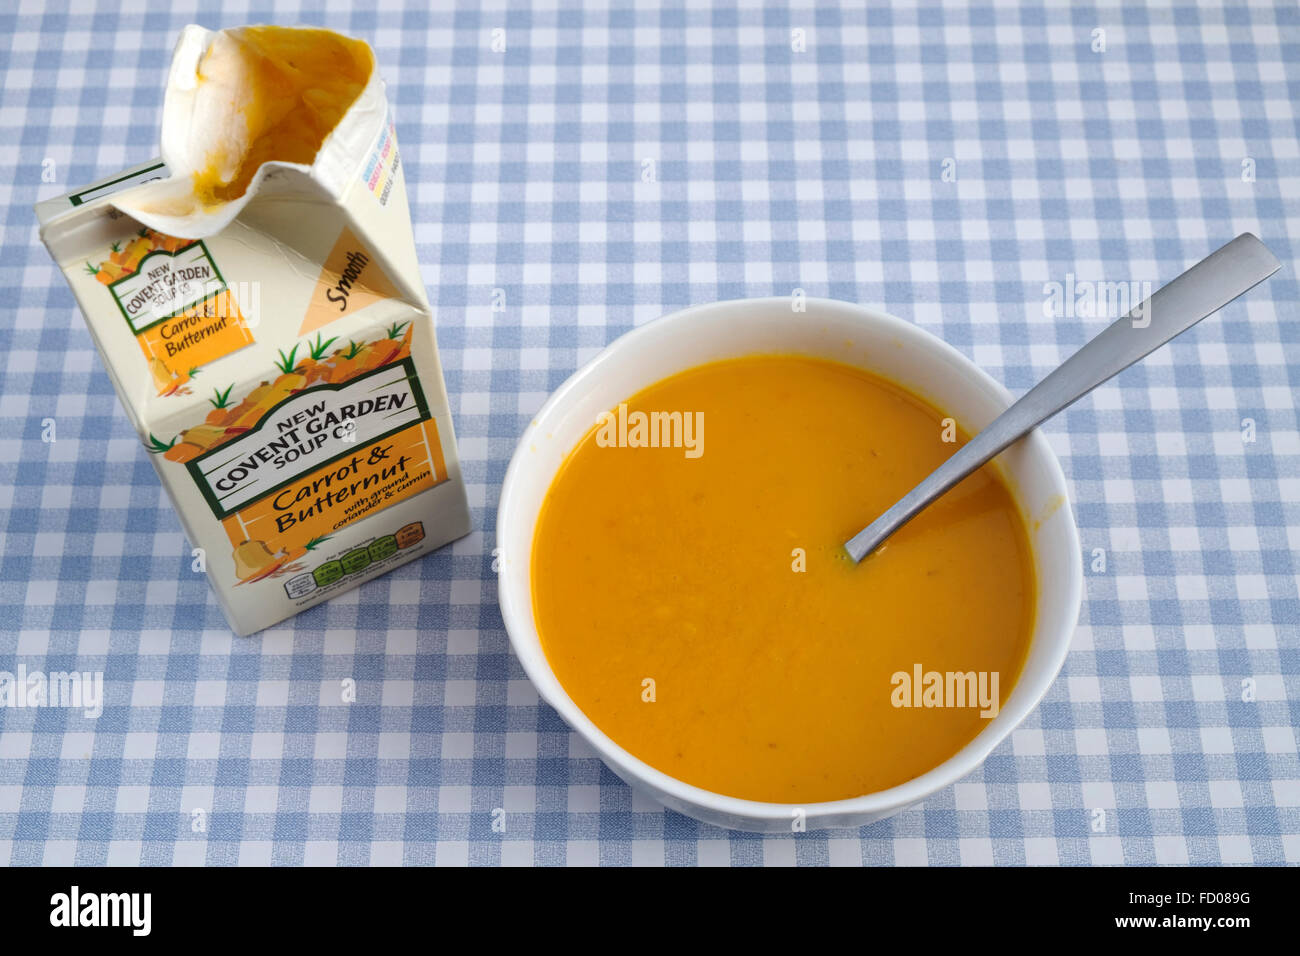 New Covent Garden Soup Company Carrot Butternut Stock Photo